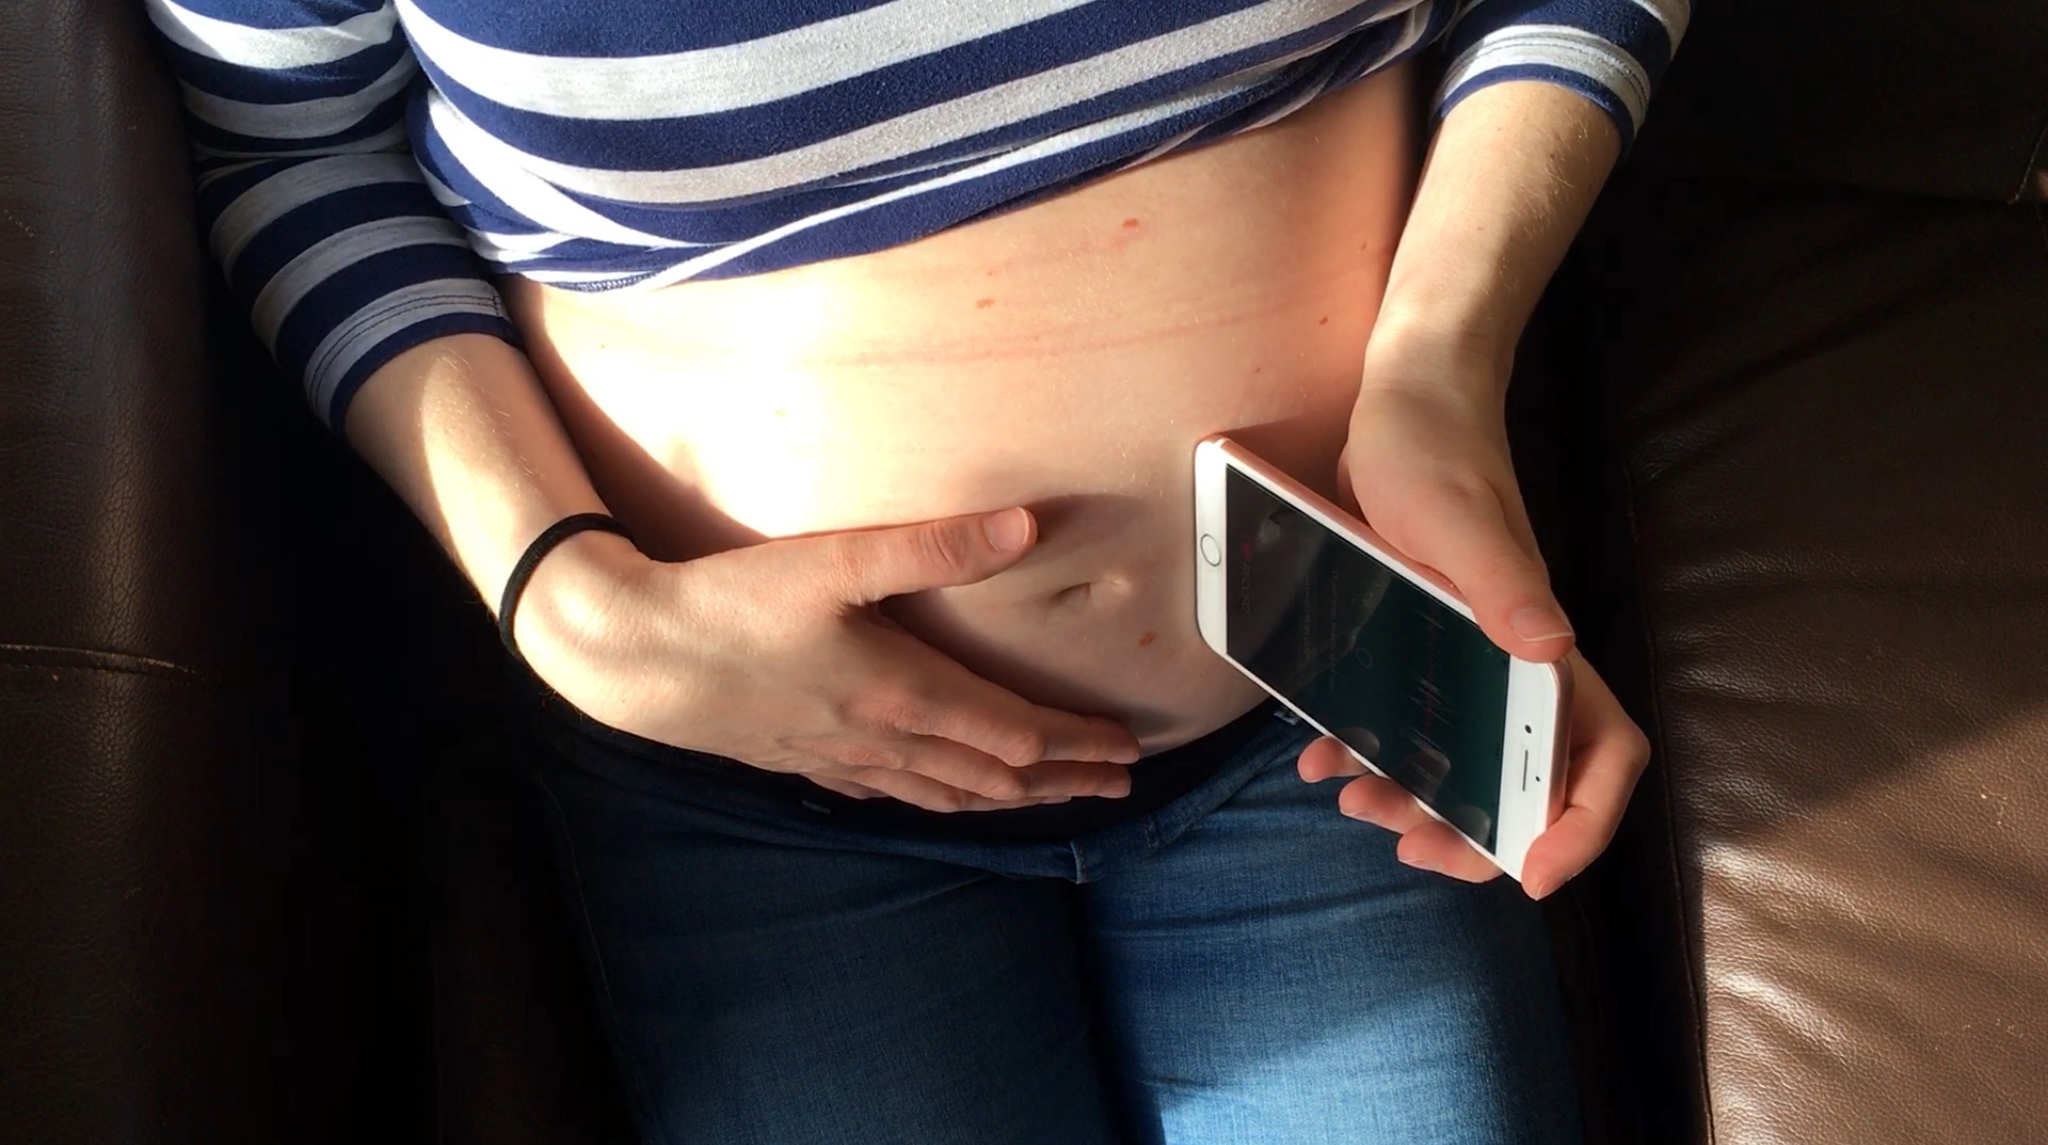  Feel for the baby's back or chest before positioning the phone. Try different positions and angles in the same area. 